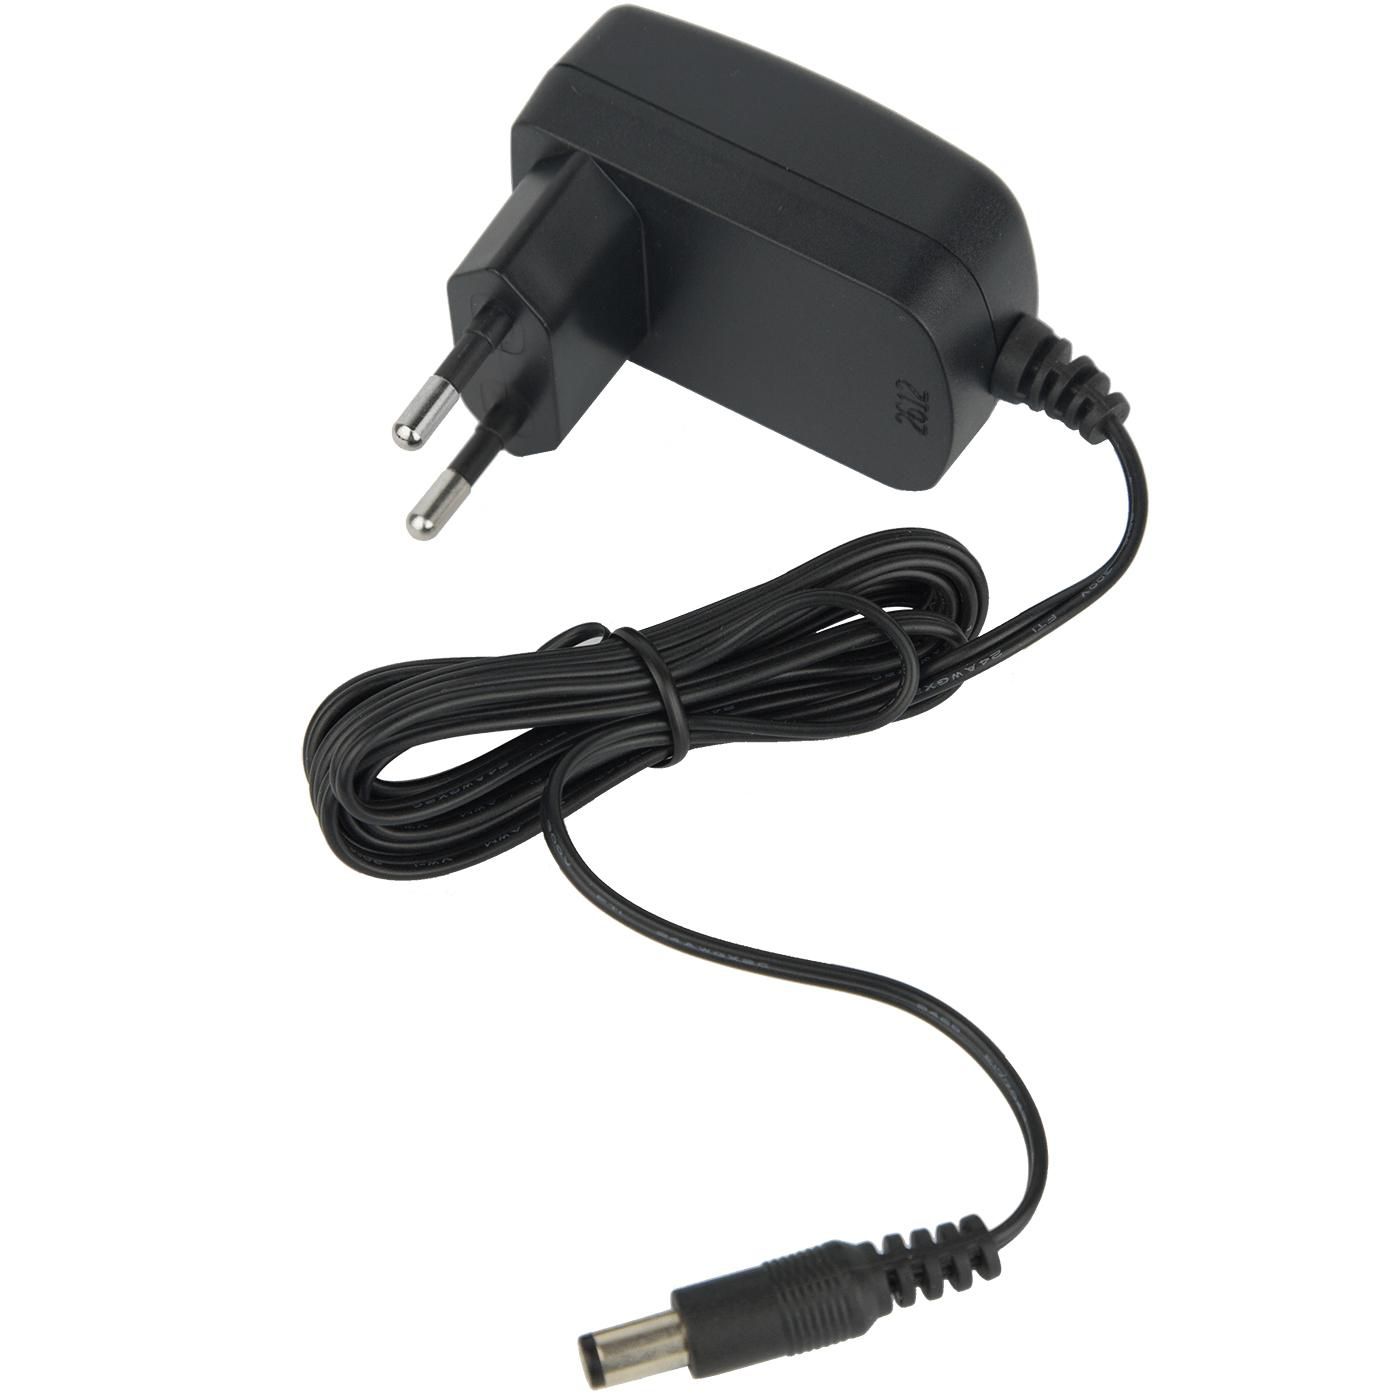 Charger For Gn2150 / Gn2250